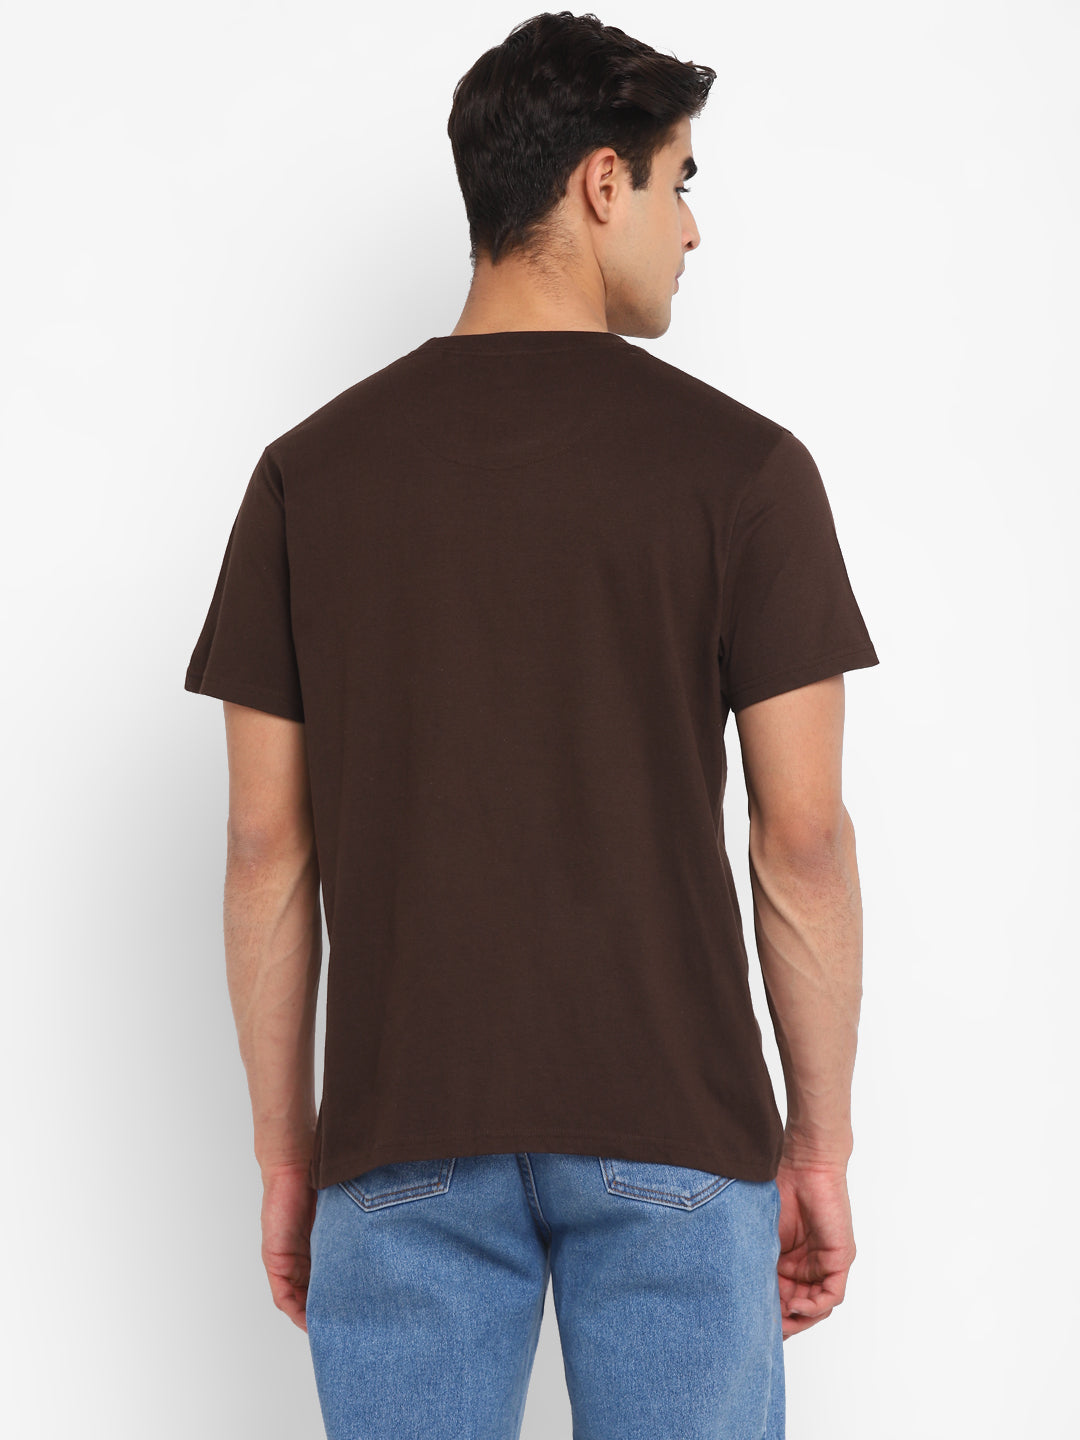 100% Cotton Printed Round Neck T-Shirt For Men - Coffee Brown